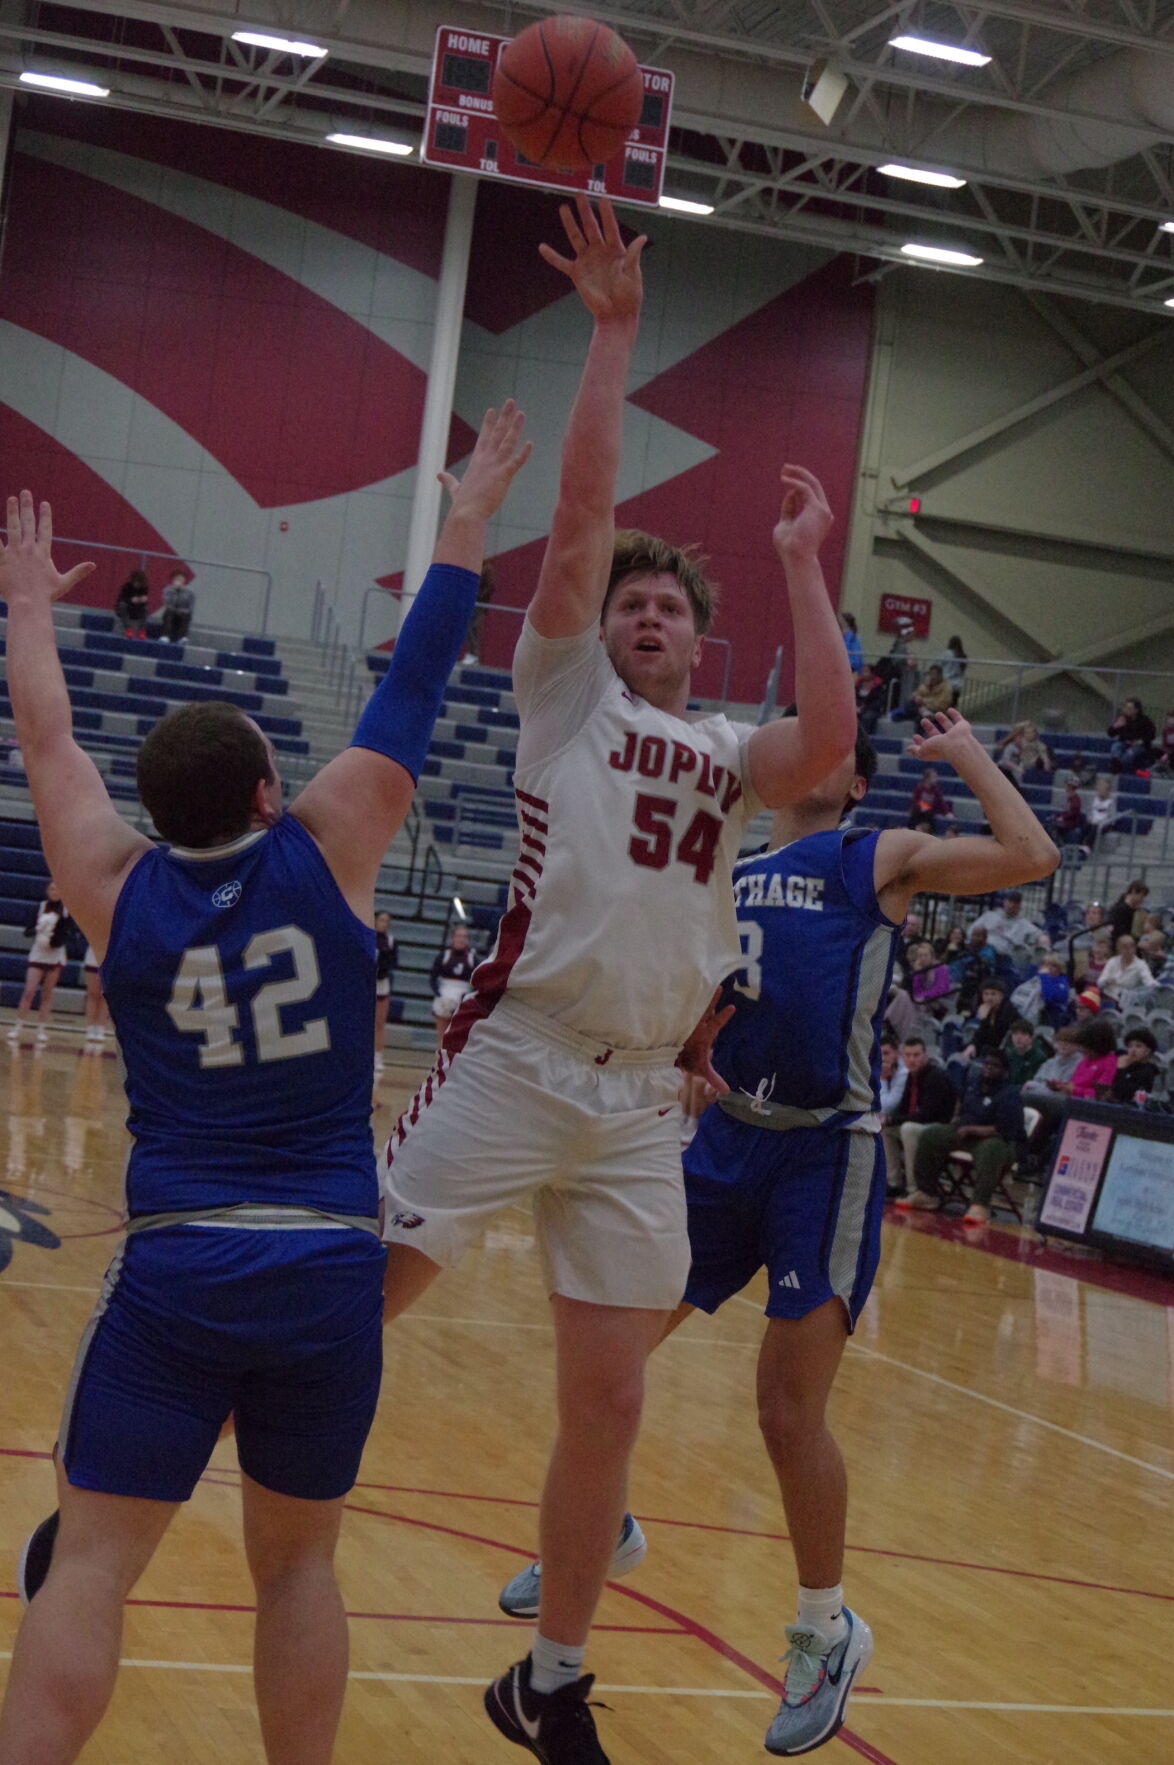 Joplin falls as Carthage’s Justin Ray eclipses 1,000 career points